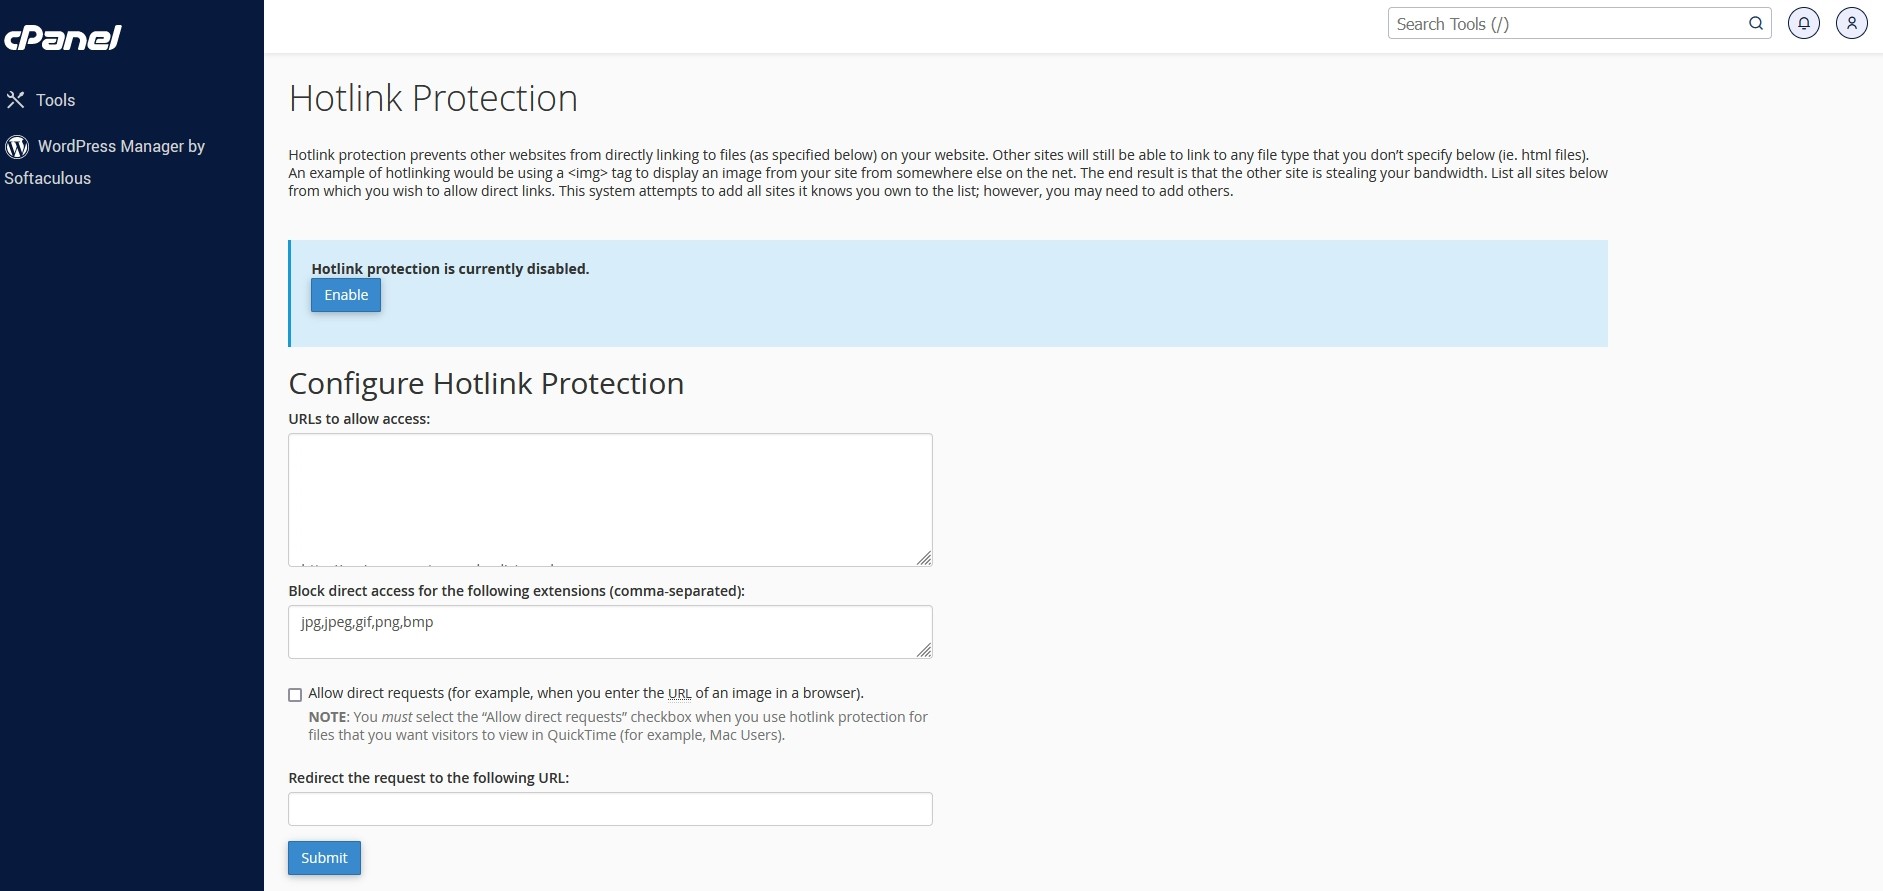 Check Image Hotlinking Prevention in cPanel